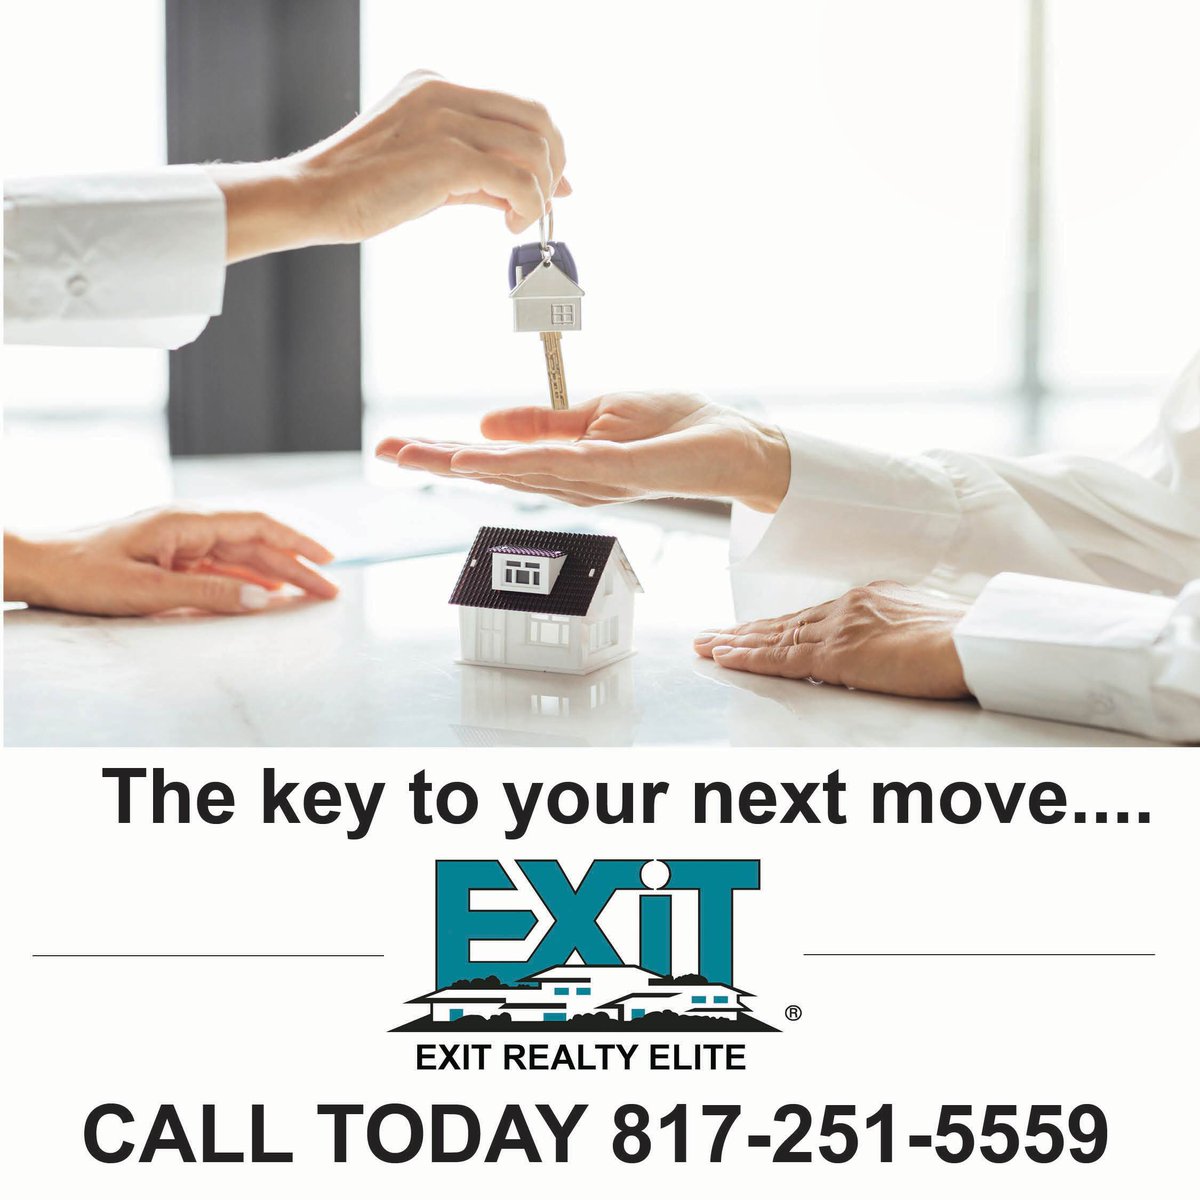 EXIT Realty Elite is the key to your next move!

#LOVEXIT #ImSold #ThinkSmartThinkEXIT #RealEstateReinvented #ListwithEXIT #DFWMetroplex #buyahome #sellahome #EXITRealtyElite #RealEstateCareers #TexasRealEstate